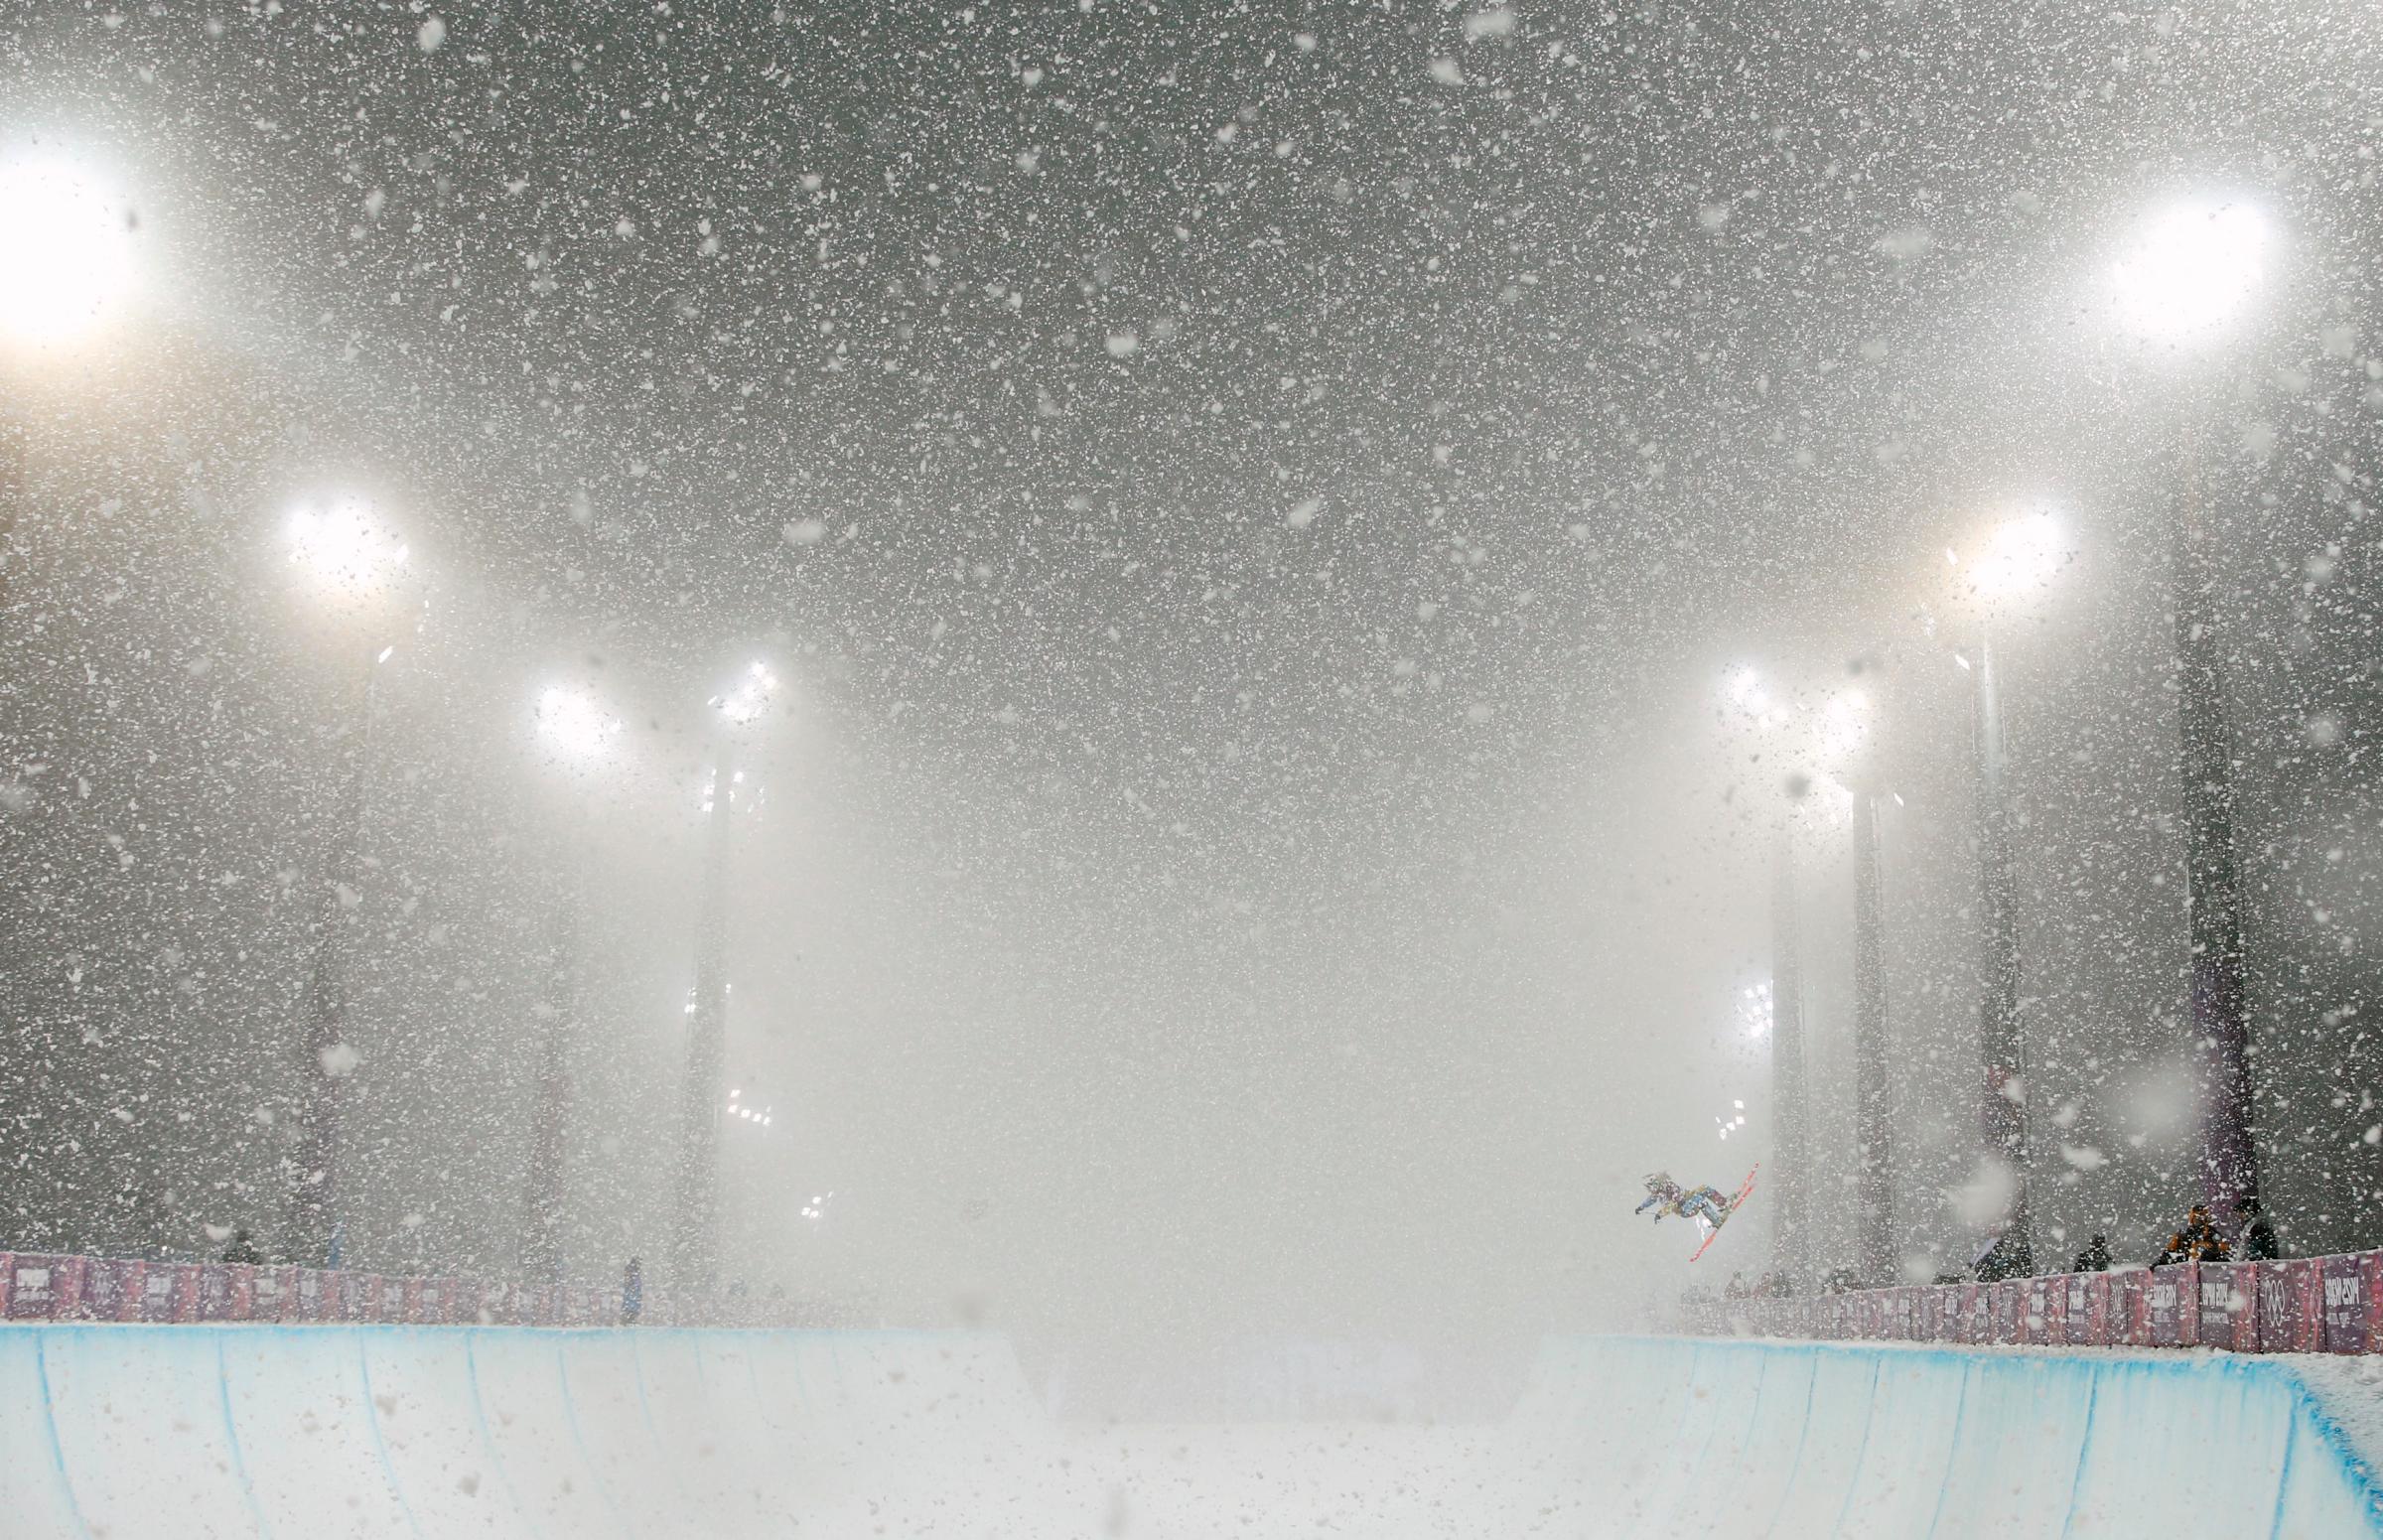 A skier competes during the men's freestyle skiing halfpipe finals.